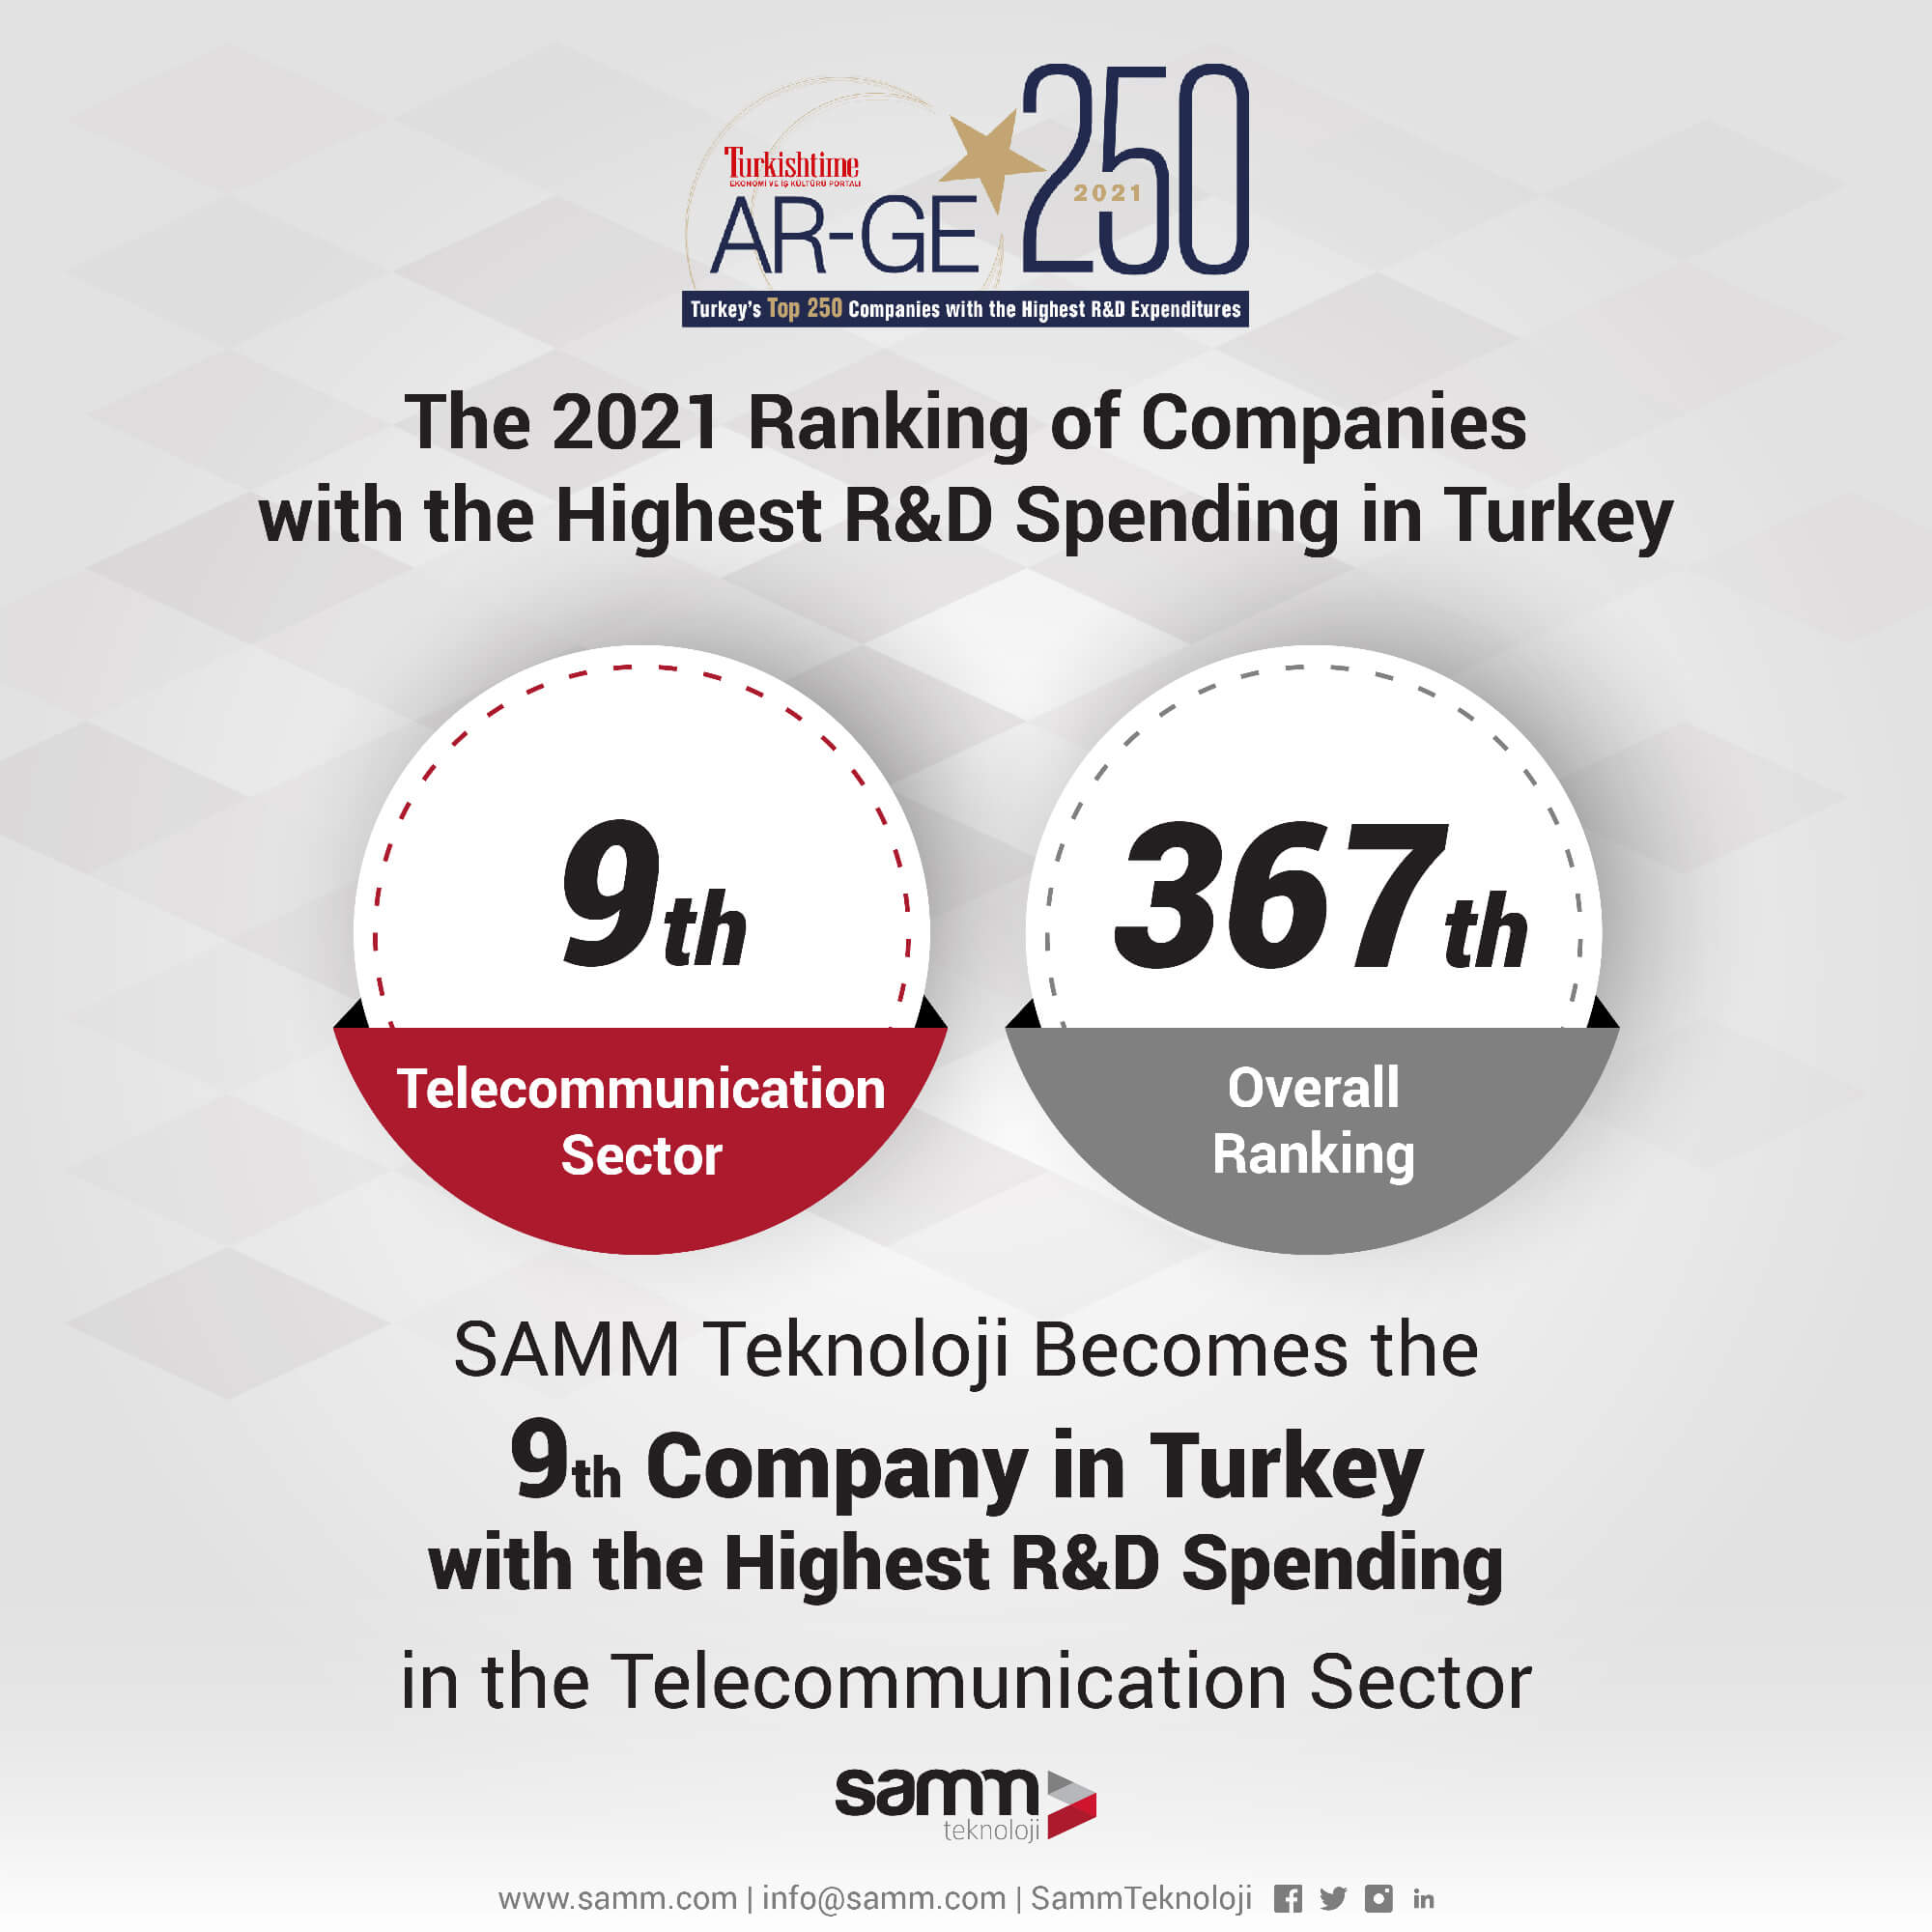 Samm Teknoloji is Among the Top 10 Companies in Telecommunication Sector R&D Investments!